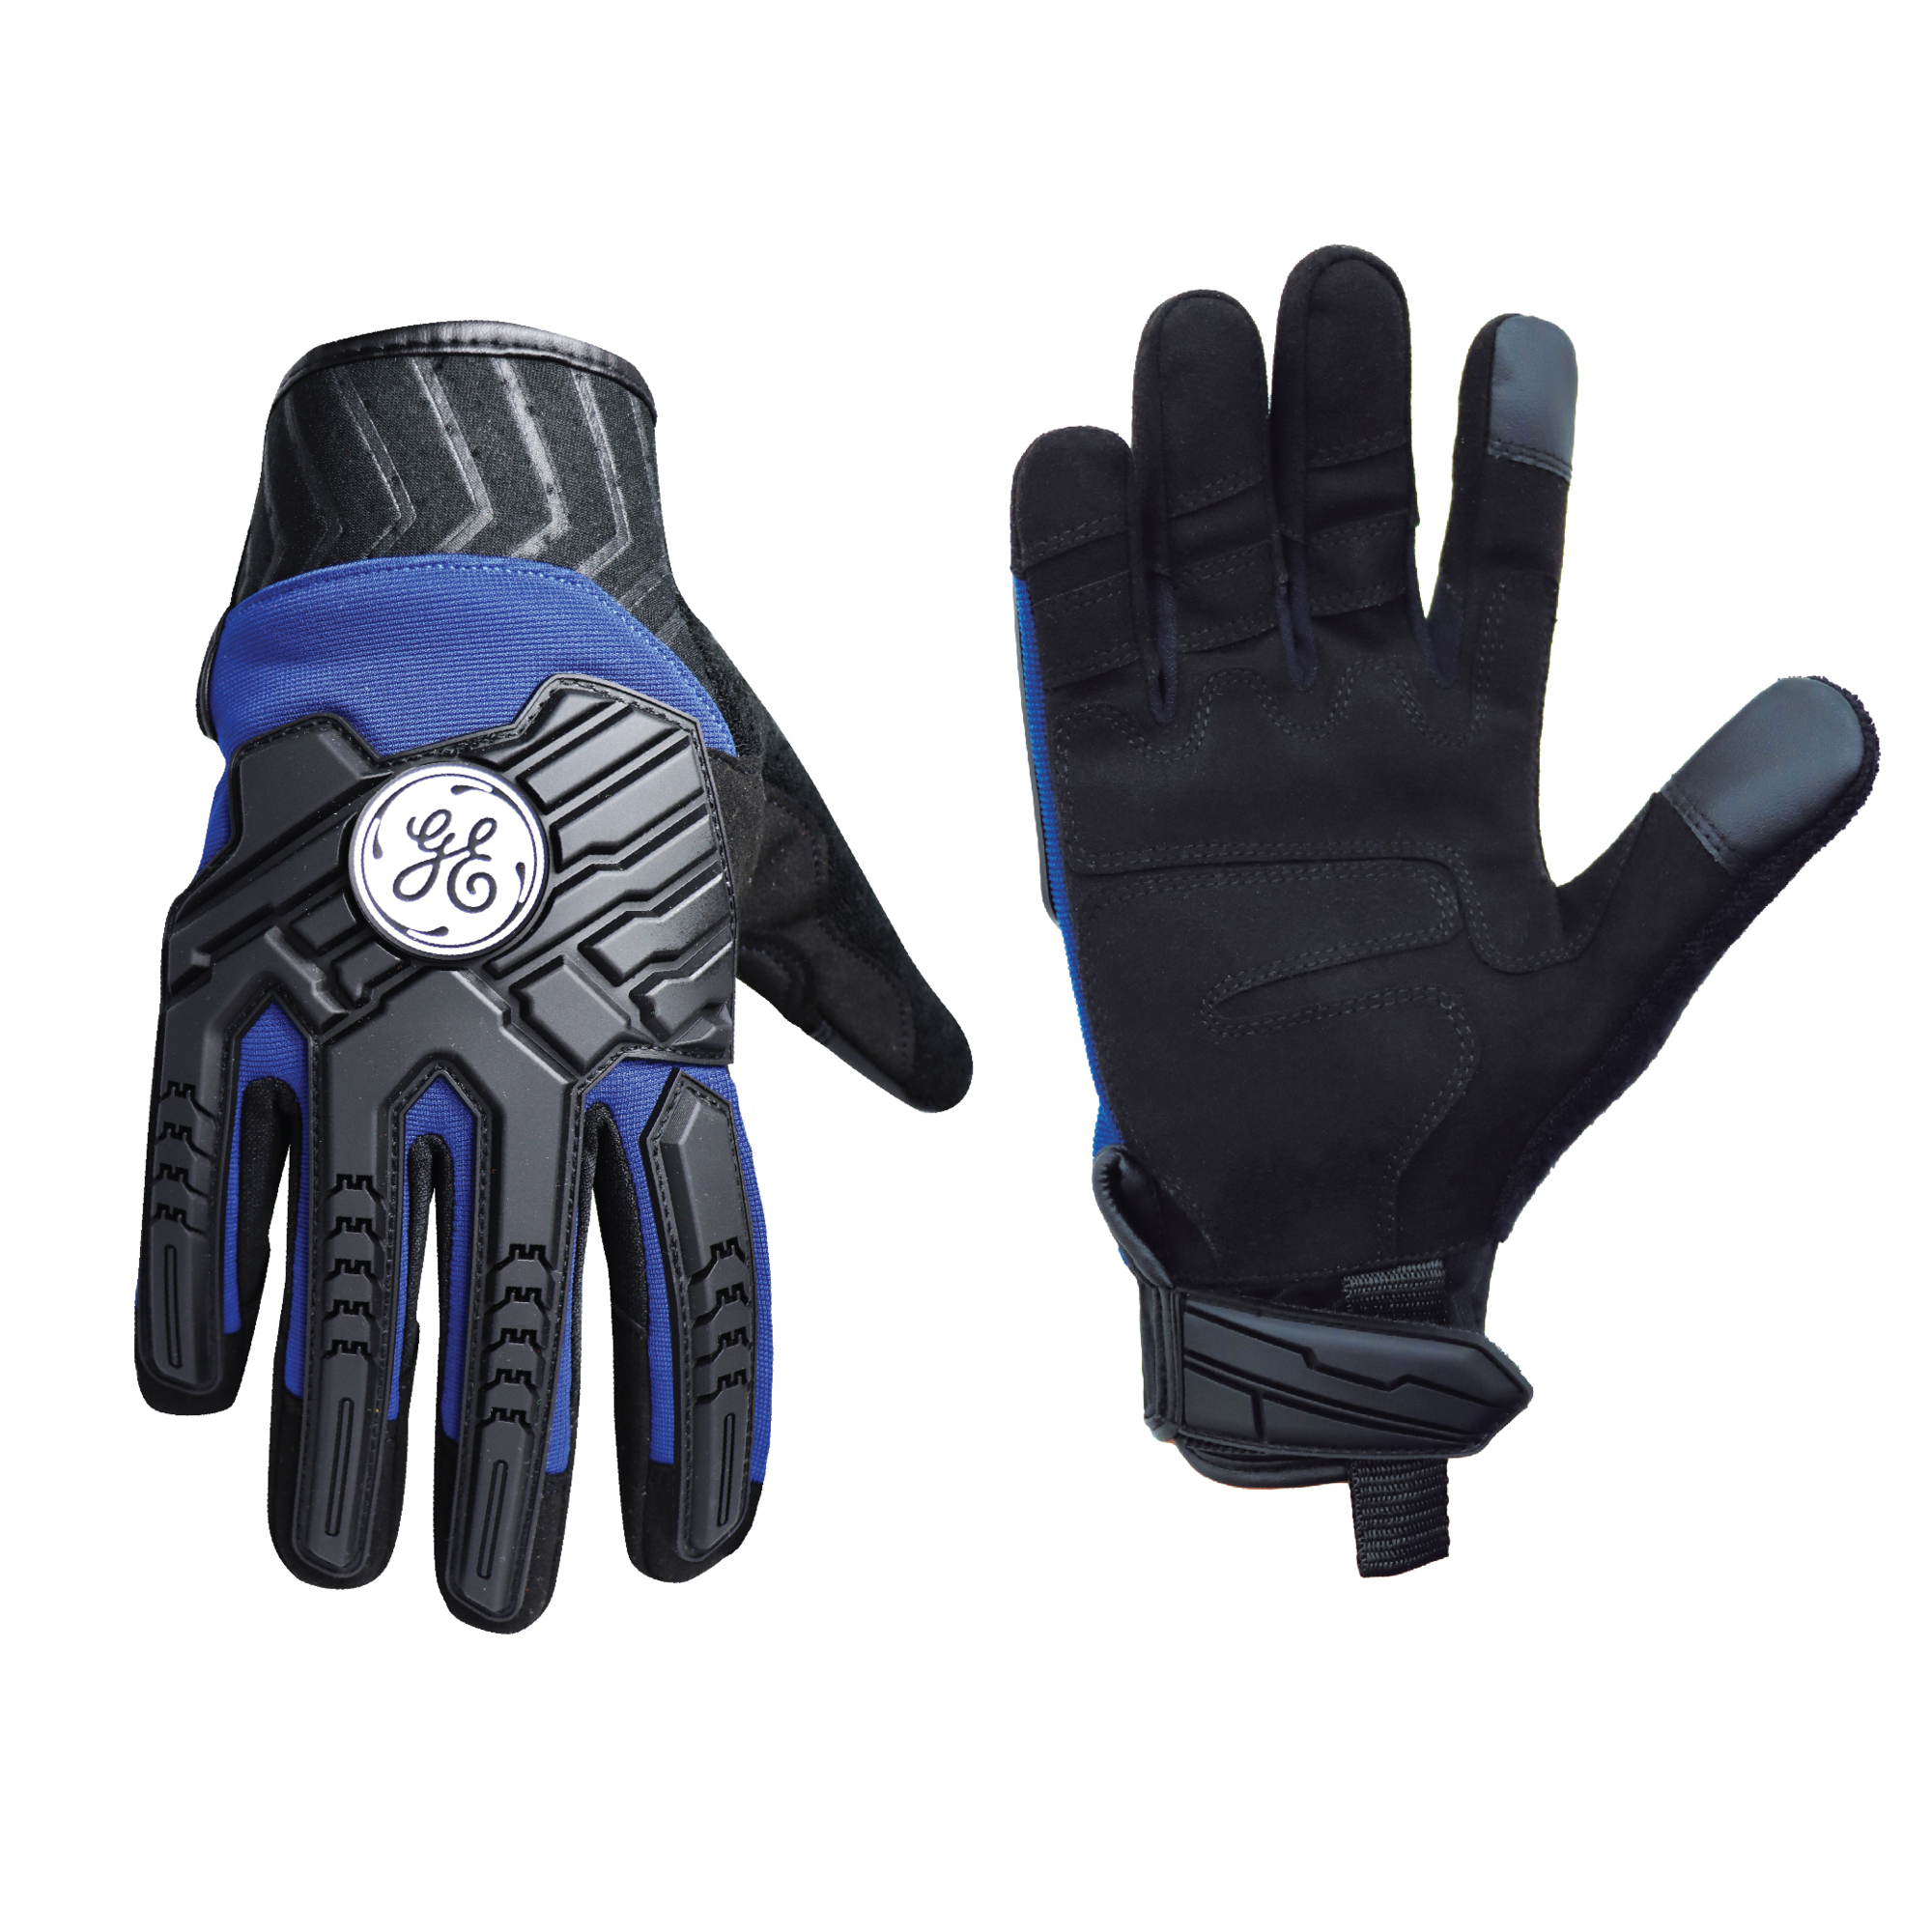 General Electric, Mechanic's Glove Blue XL 1 pair, Size XL, Included (qty.) 1, Model GG416XLC